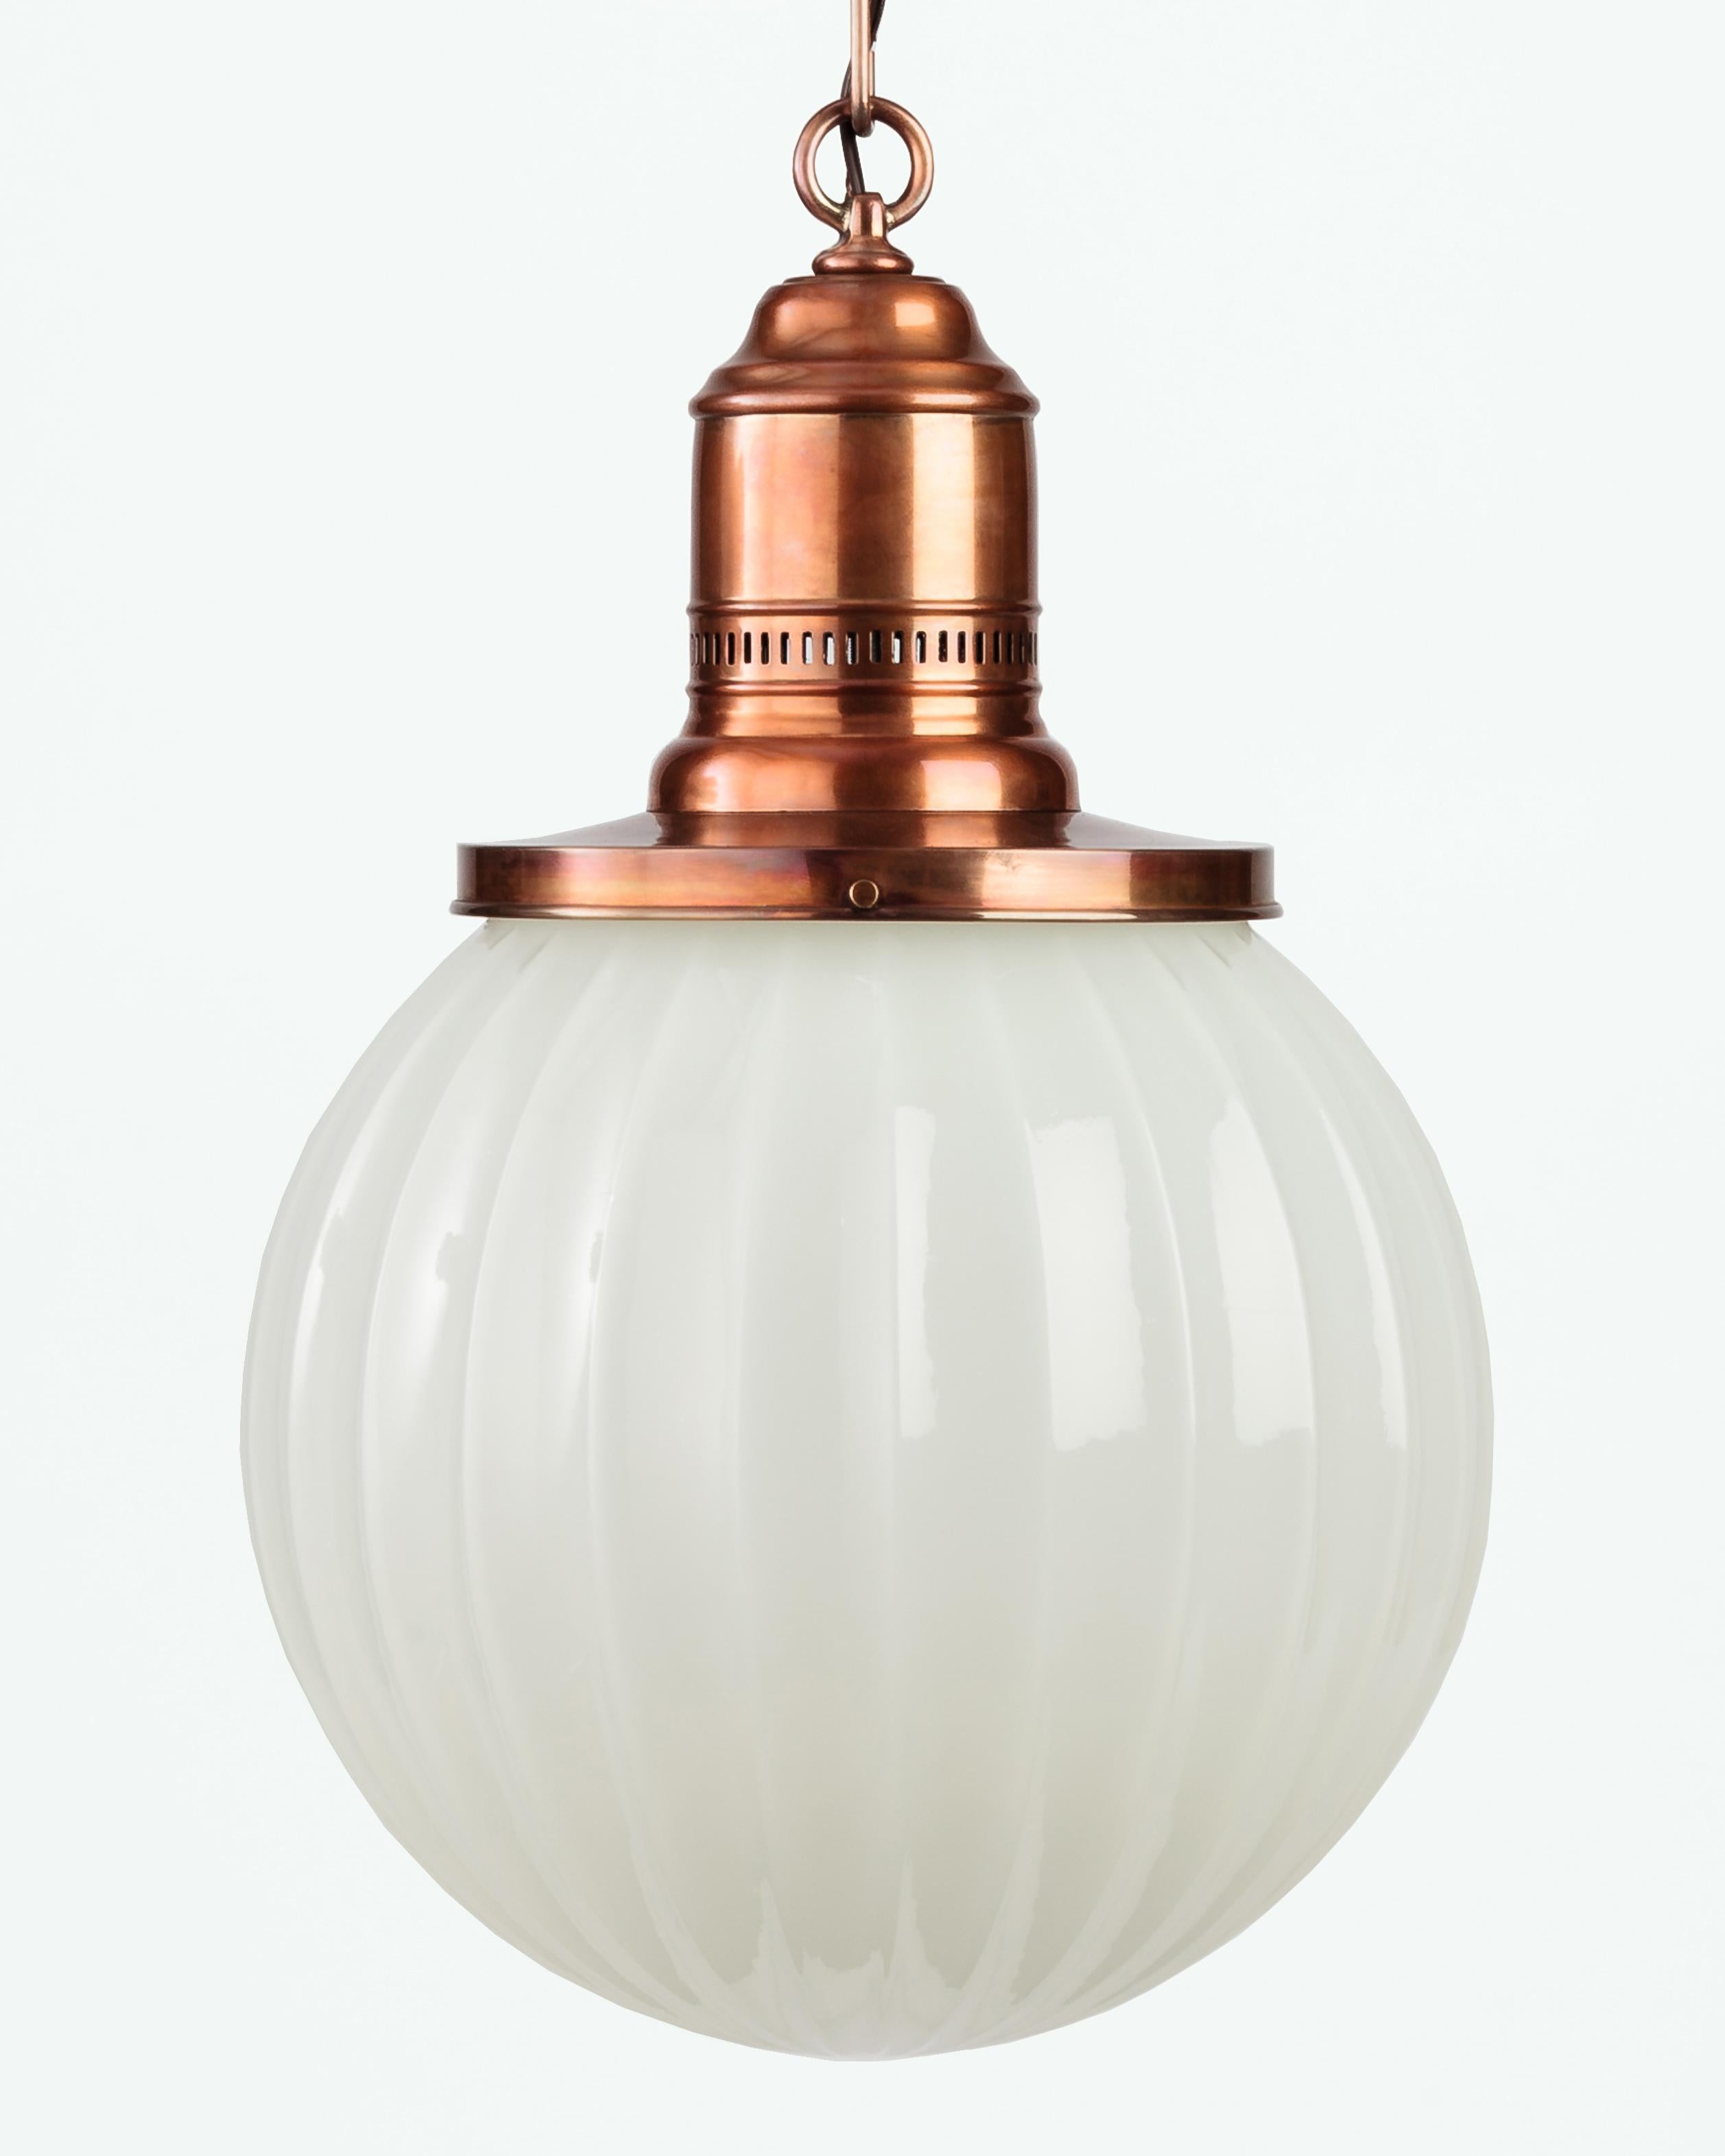 AHL3768

An antique fluted opaline glass globe on warm aged copper fittings, the vintage fitter with pierced details. Due to the antique nature of this fixture, there may be some nicks or imperfections in the glass as well as variations from piece